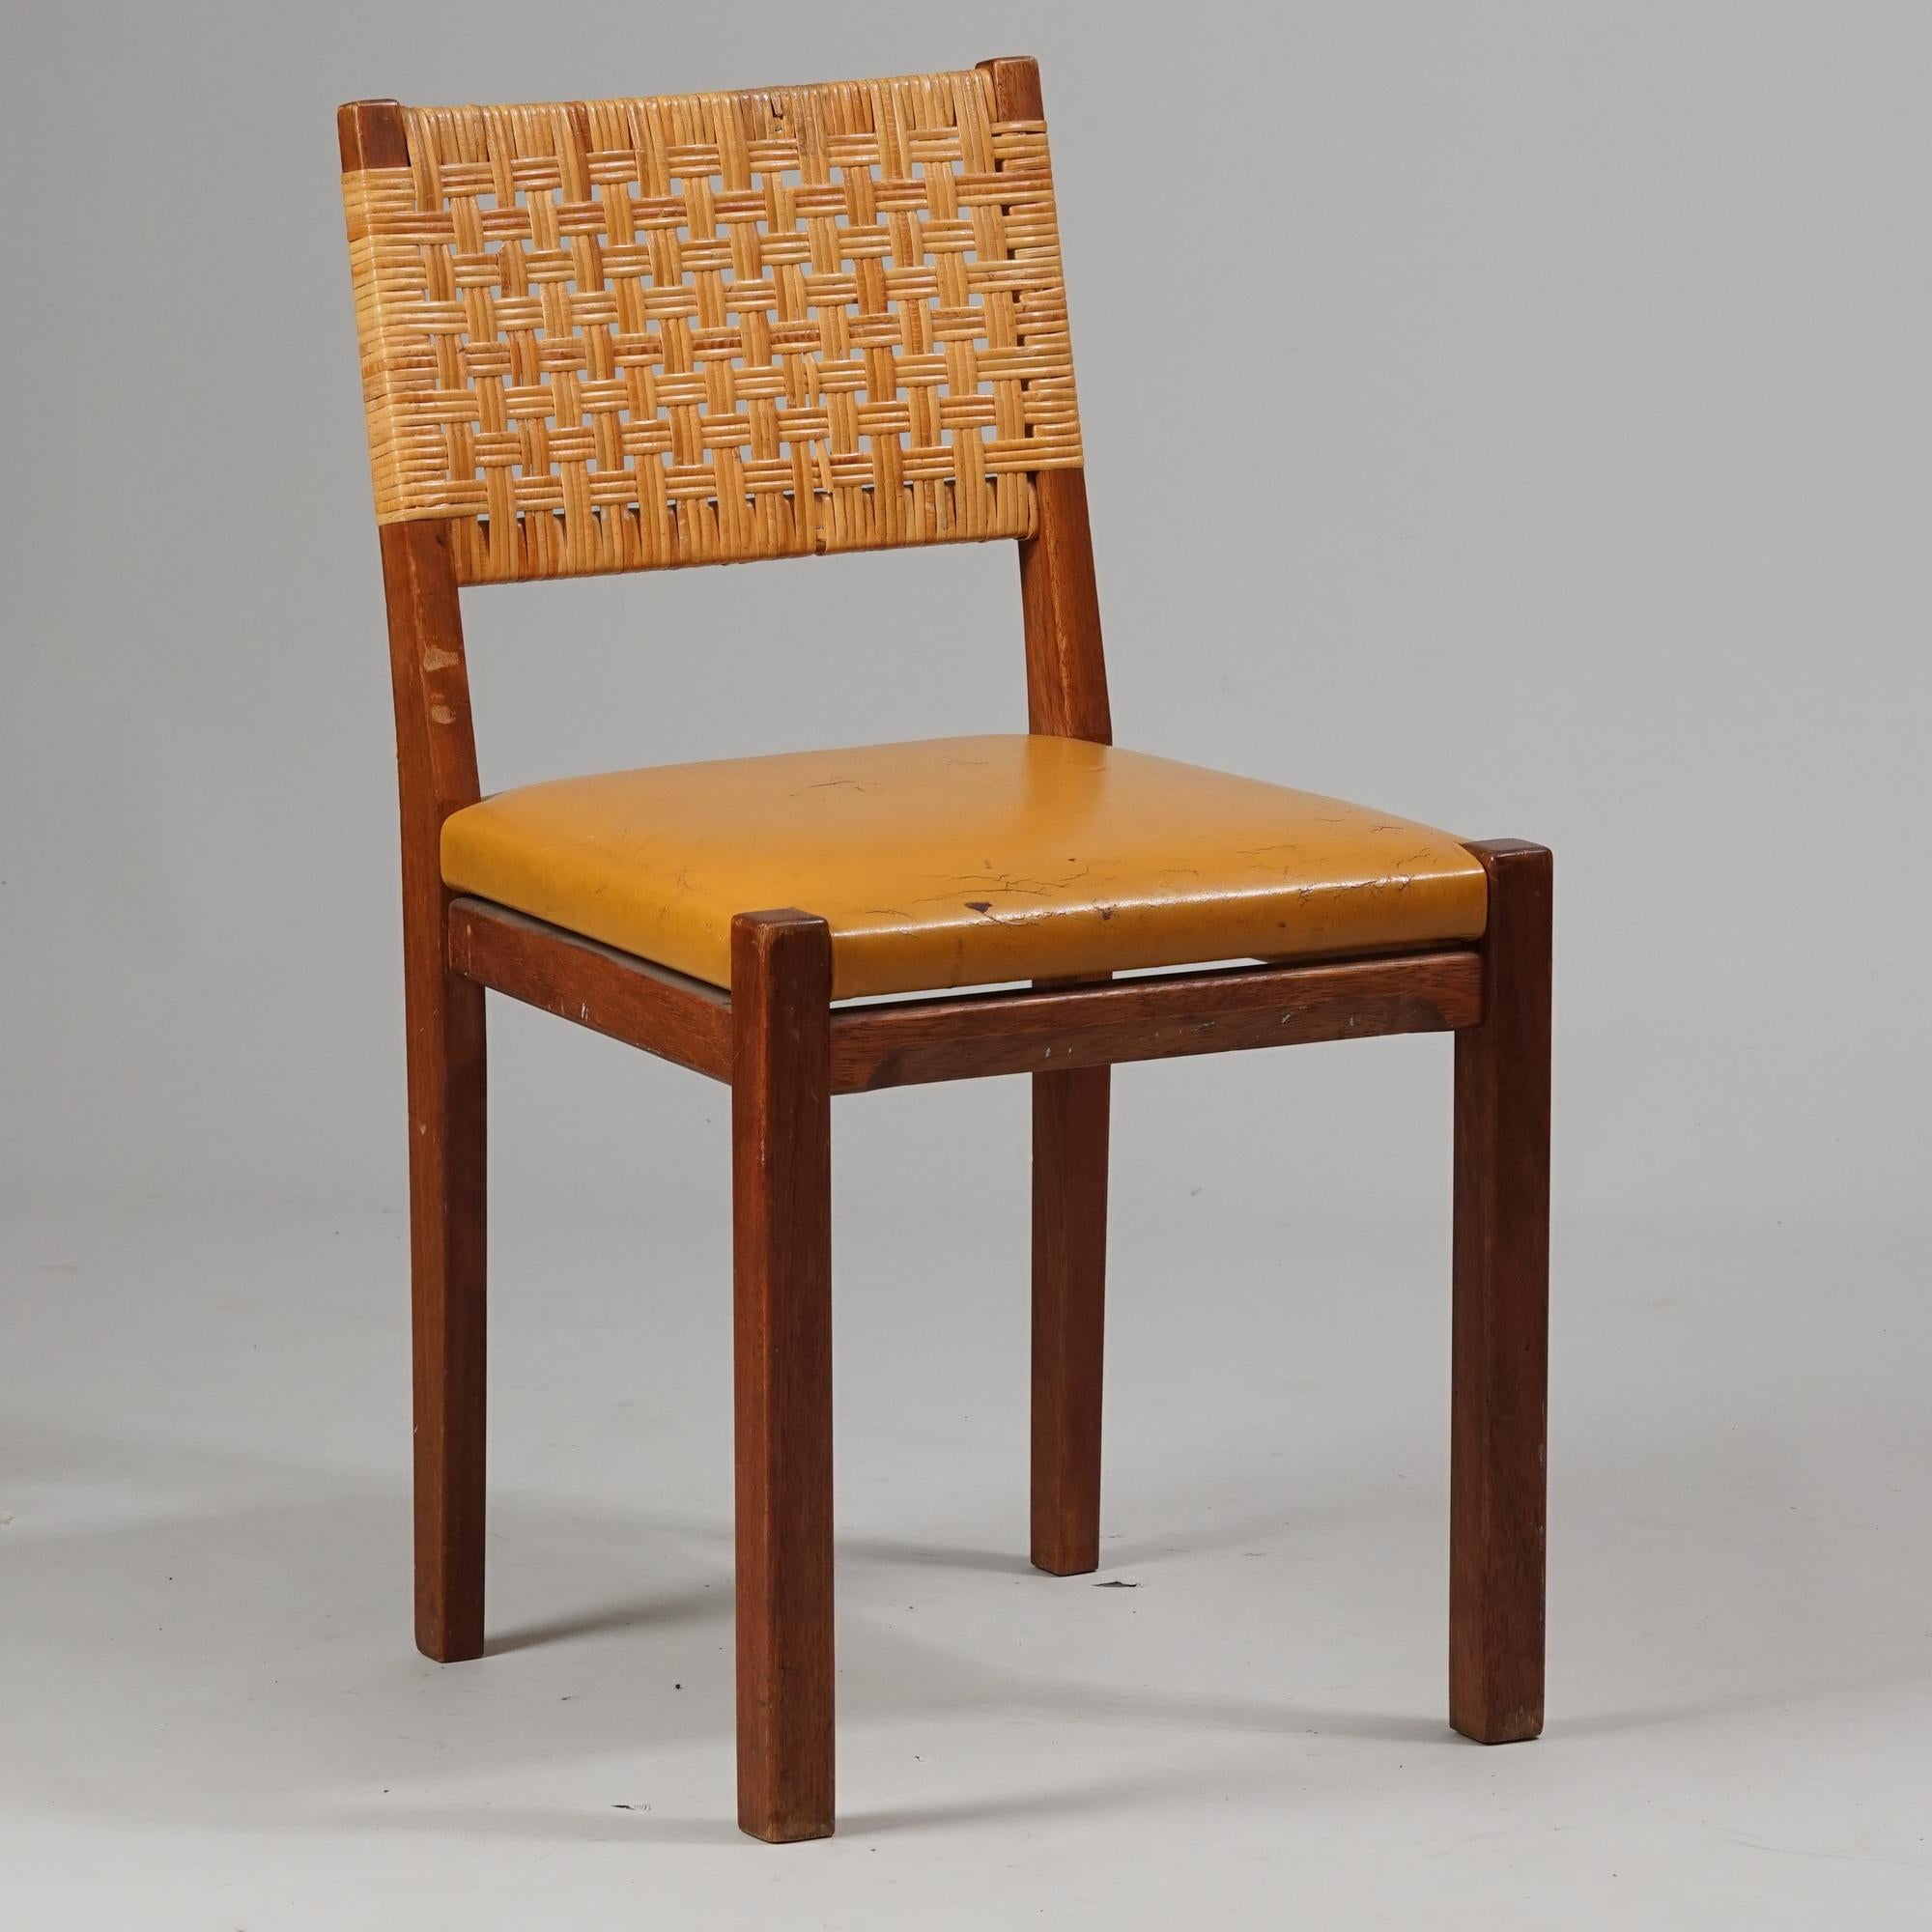 Chair Model 615 by Aino Aalto for O.Y Huonekalu- ja Rakennustyötehdas A.B from the 1950s. Teak frame with leather seating and beautiful rattan backrest. Good vintage condition, patina and wear consistent with age and use. A classic functionalist